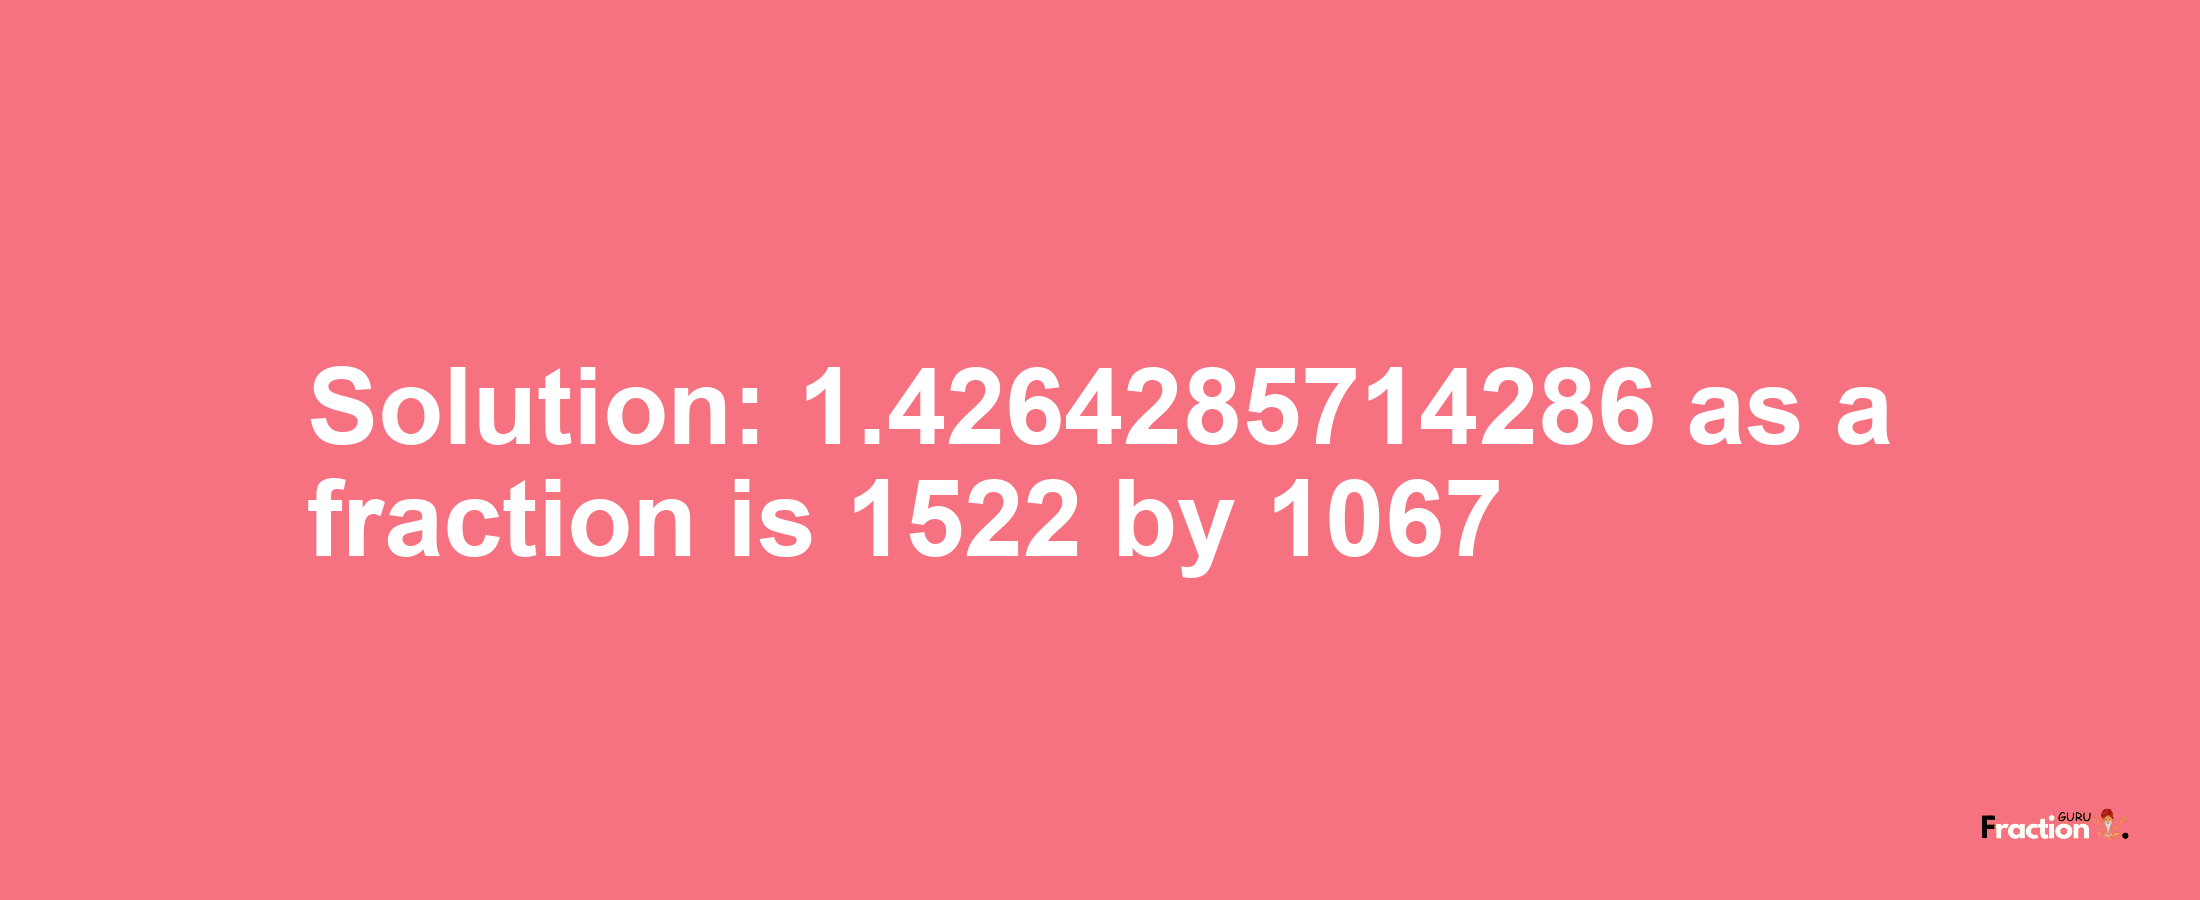 Solution:1.4264285714286 as a fraction is 1522/1067